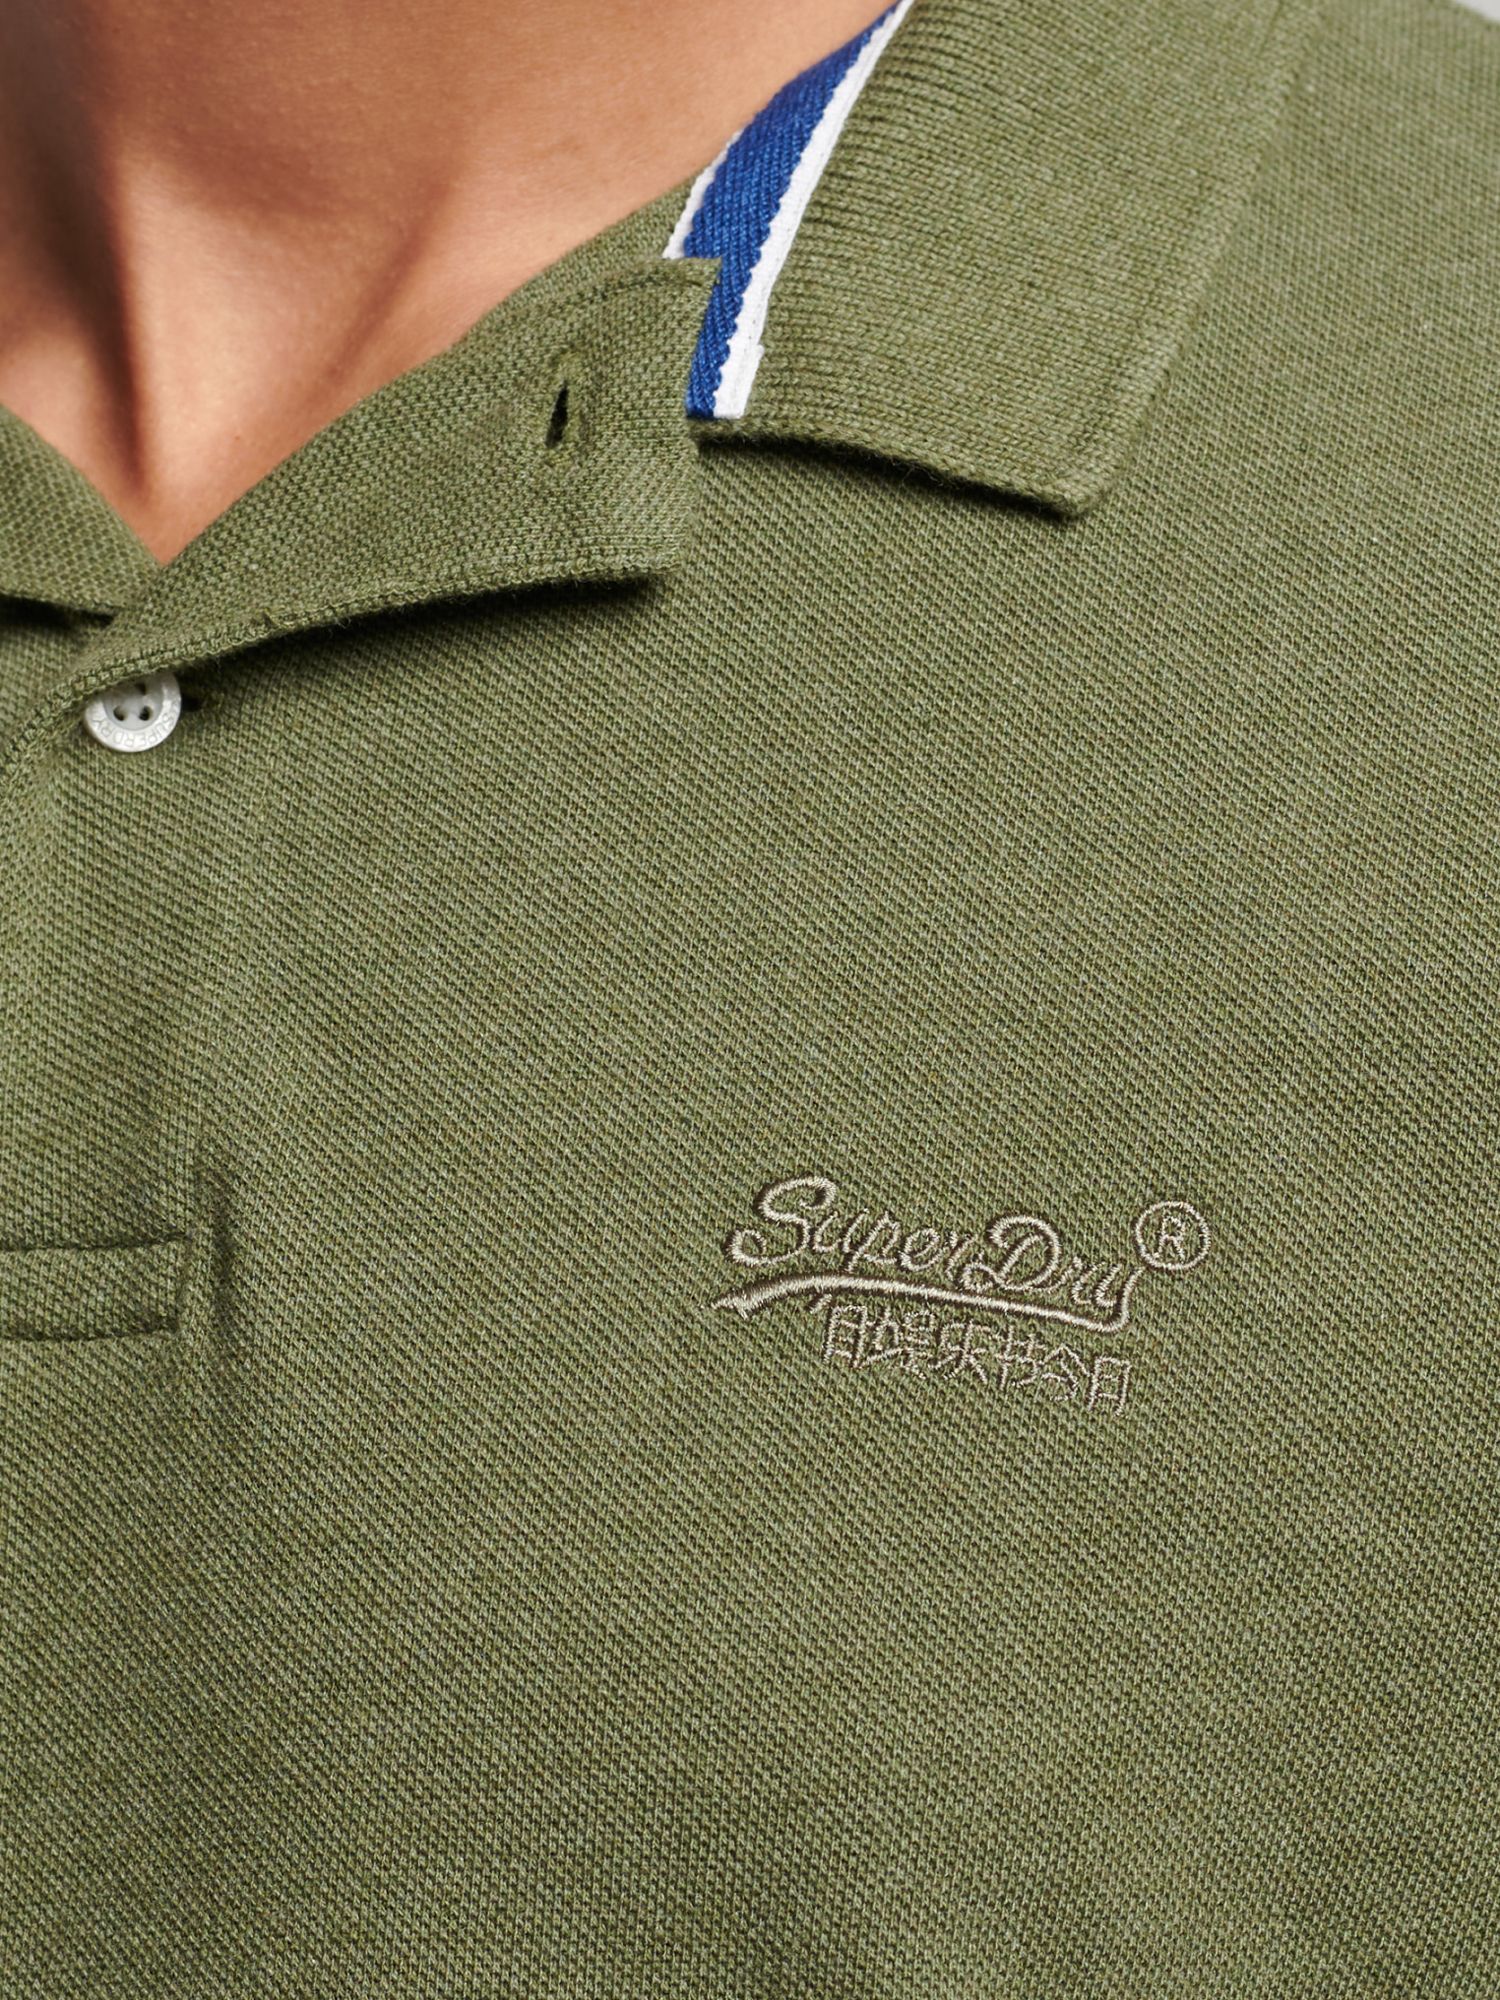 Superdry Classic Pique Polo Shirt, Thrift Olive Marl, S